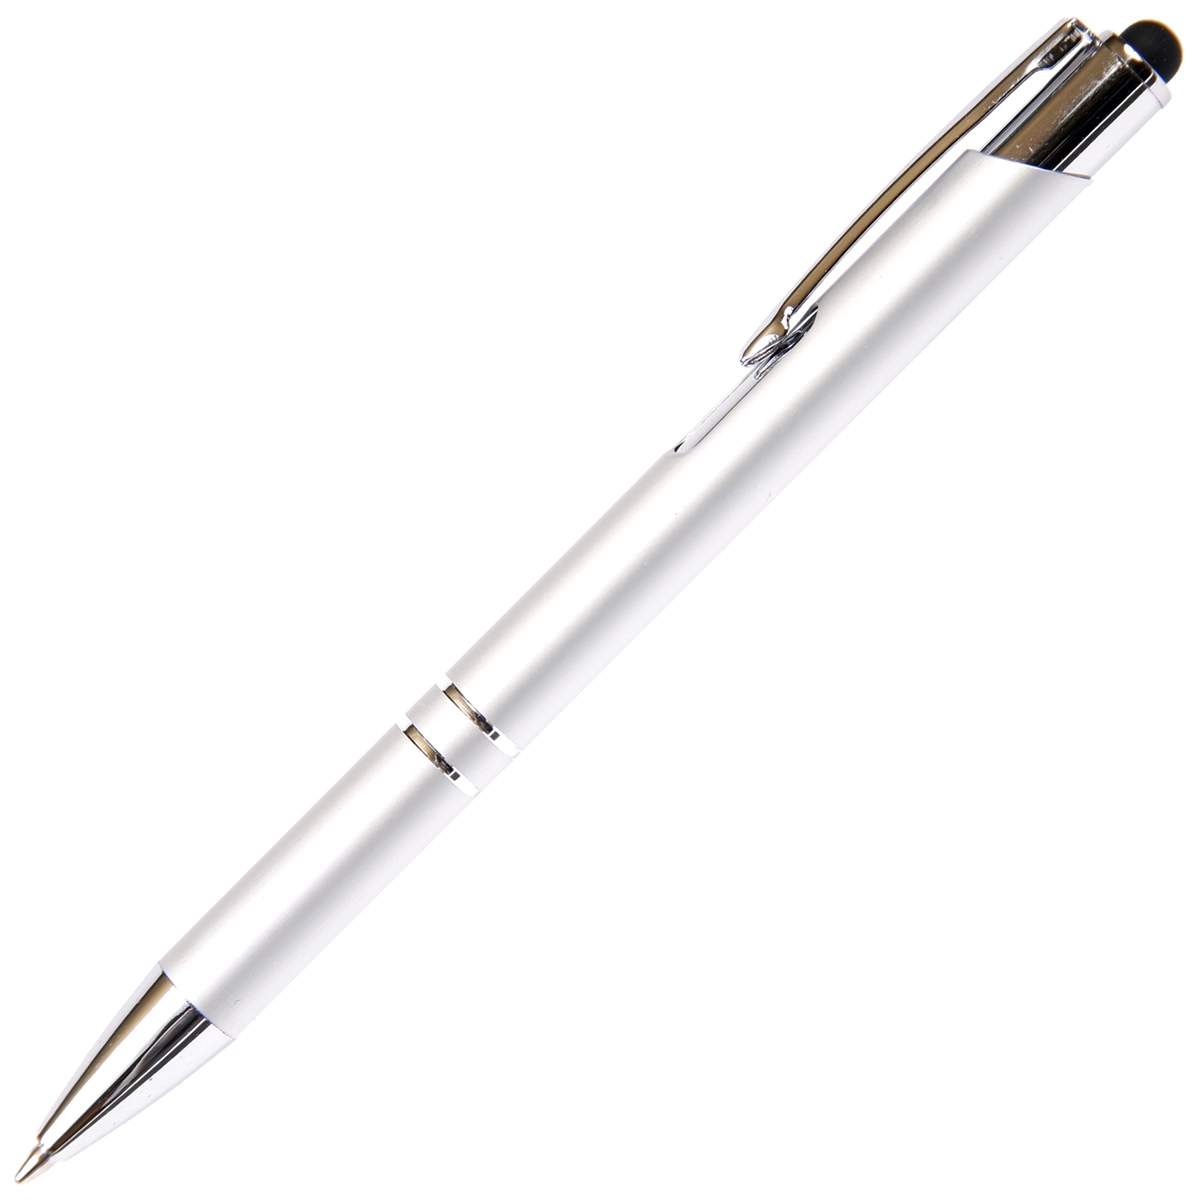 B204 - Silver Ball Point with Stylus